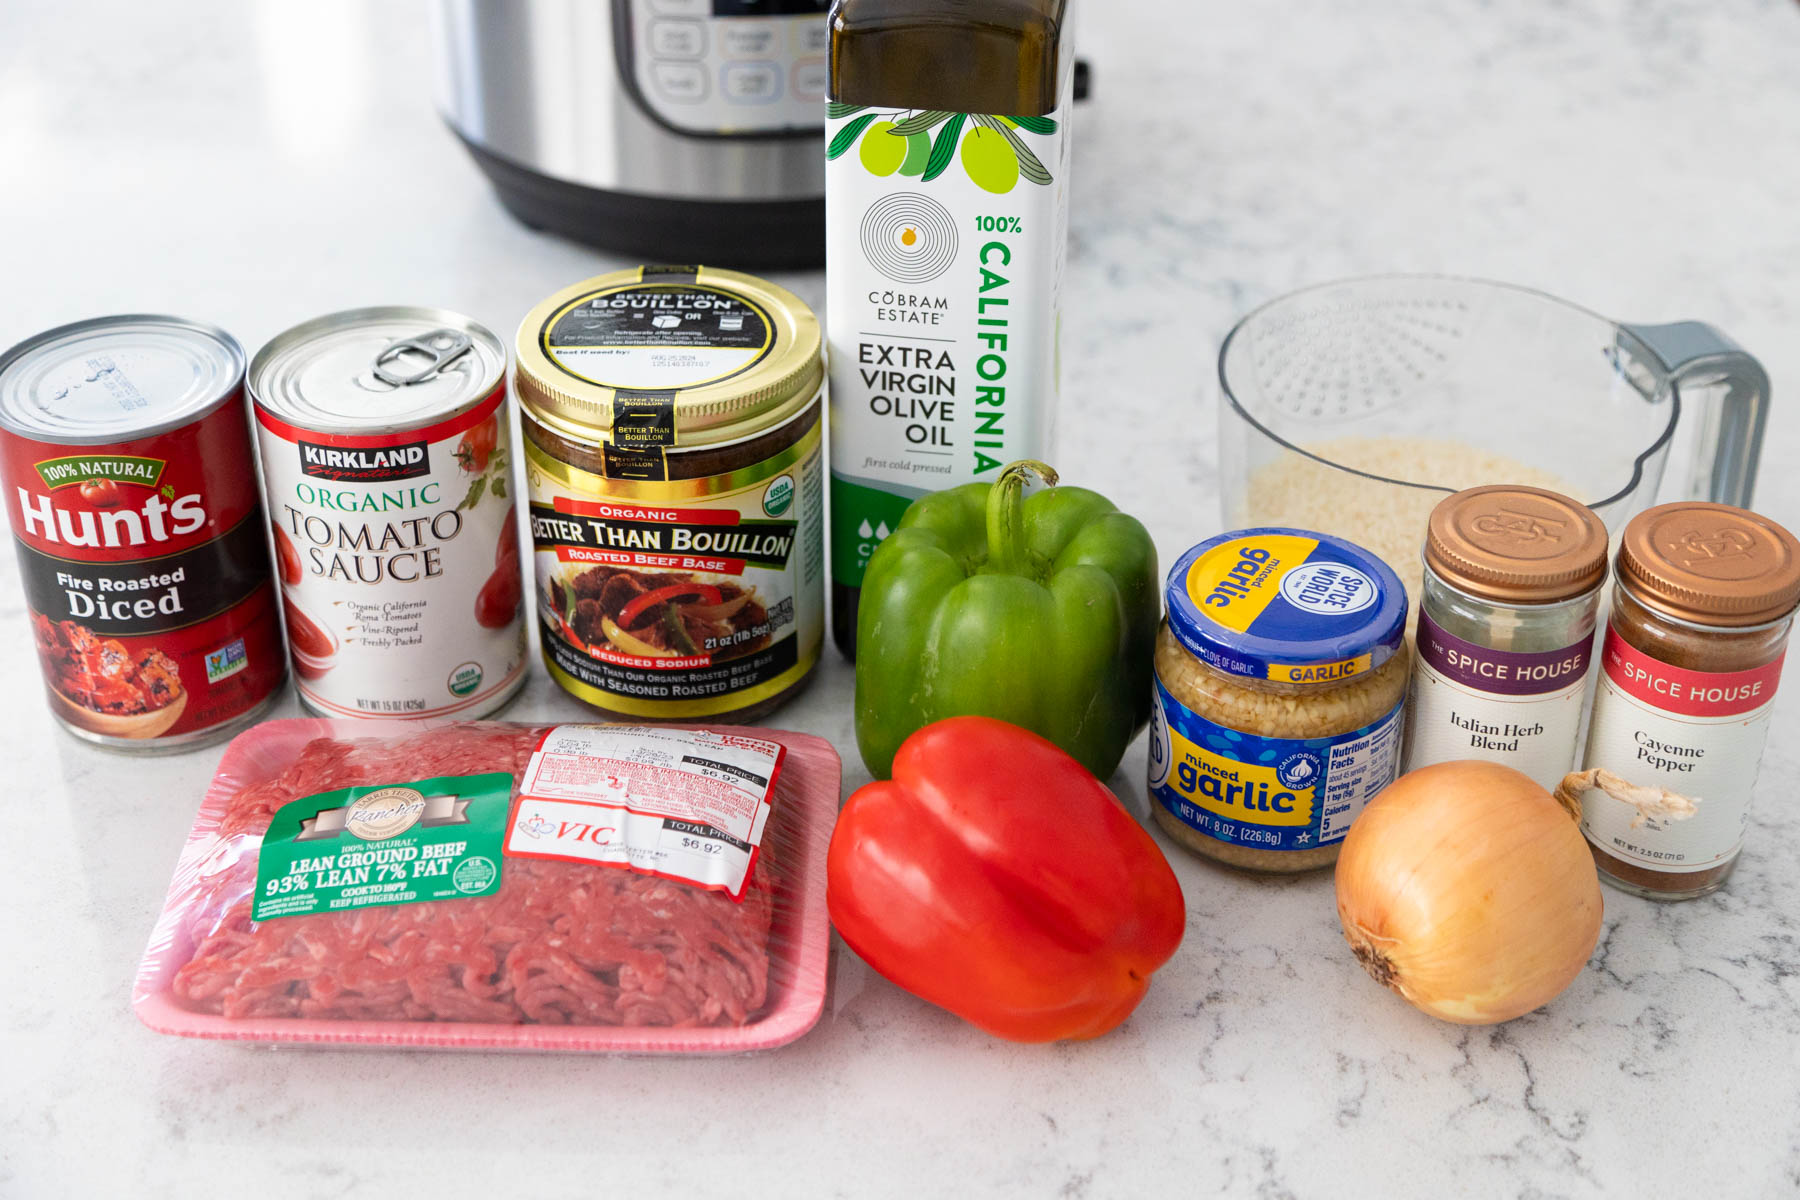 All the ingredients to make stuffed pepper soup in an Instant Pot are on the counter.